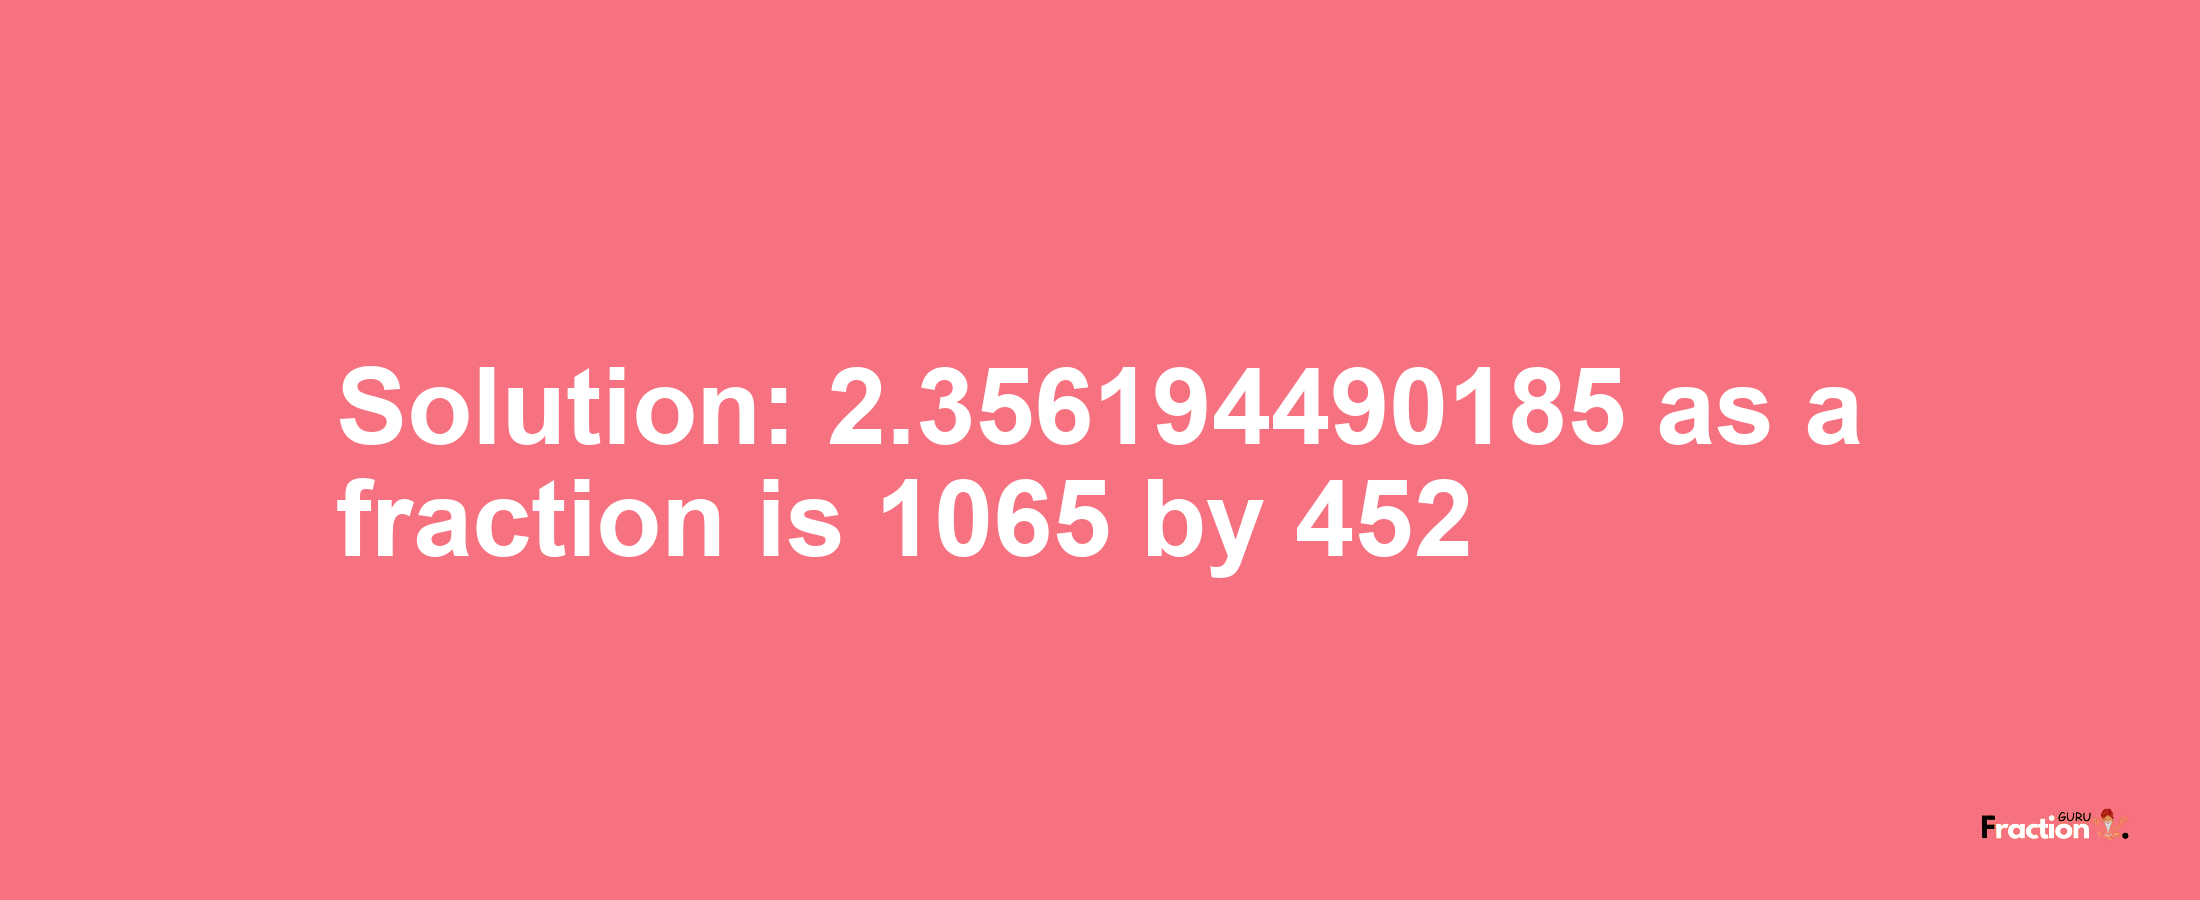 Solution:2.356194490185 as a fraction is 1065/452